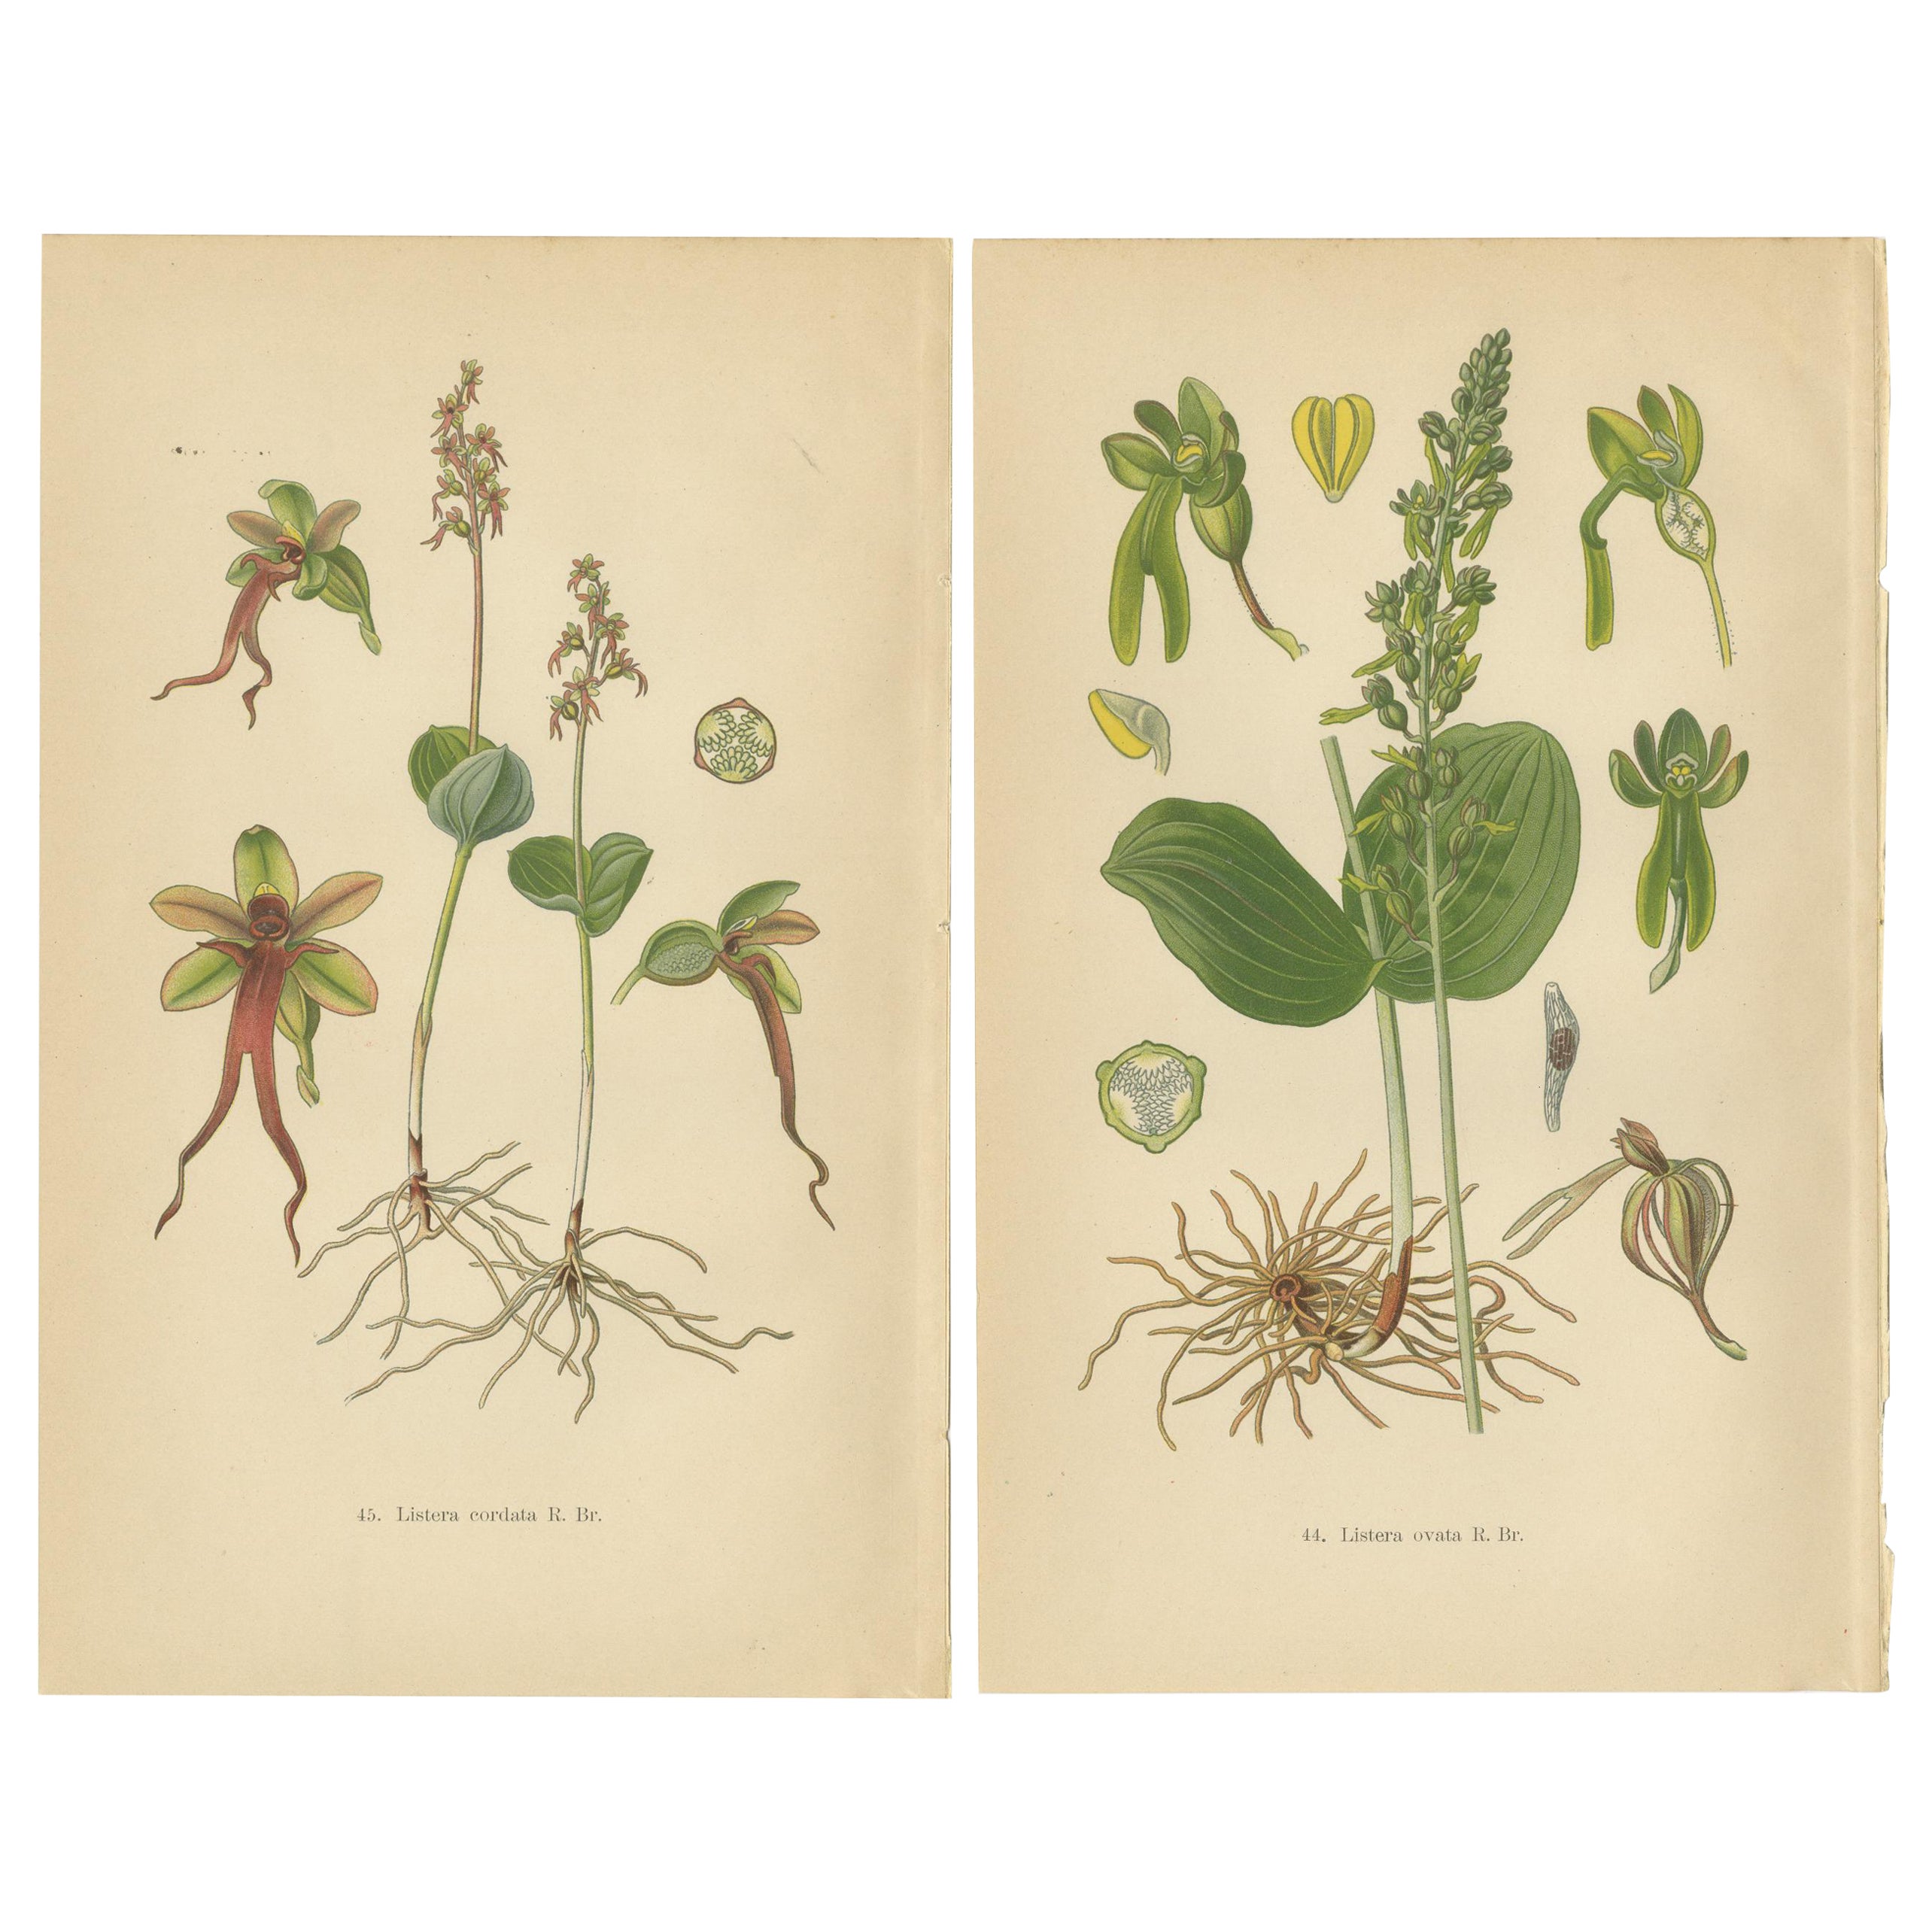 Listera Lore: Botanical Illustrations of Heart-Leaved Orchids from 1904 For Sale